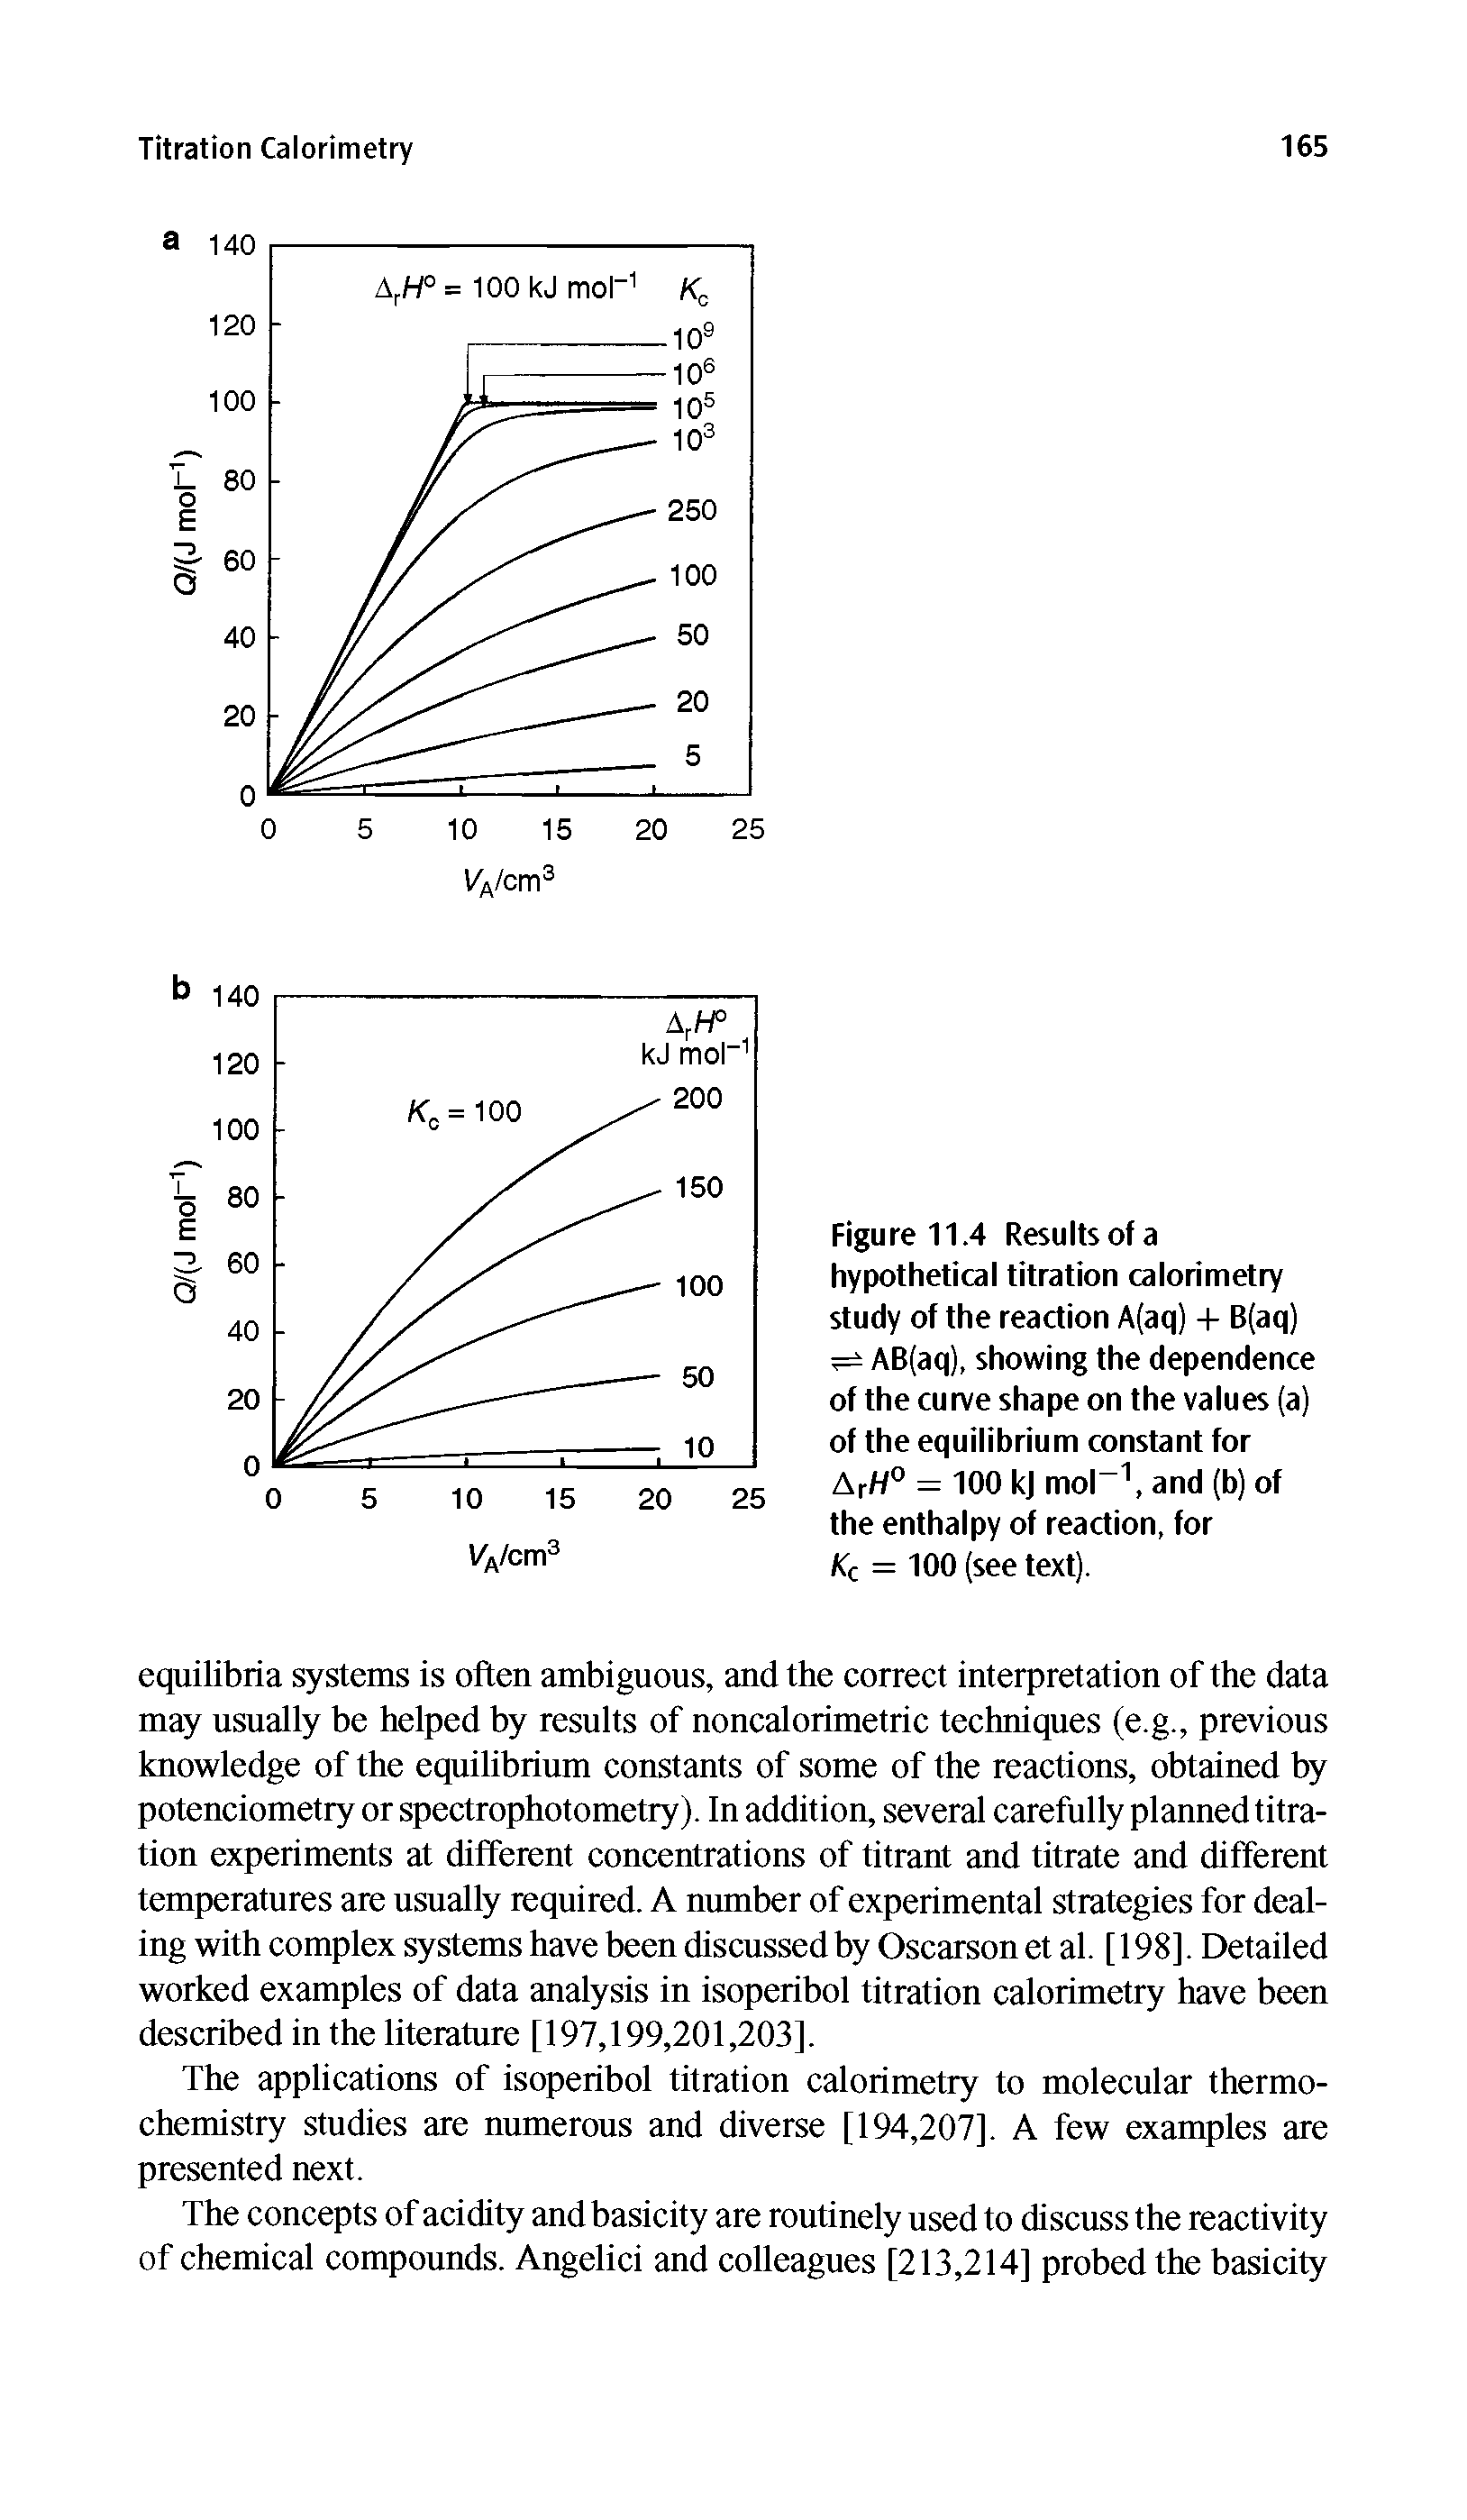 Figure 11.4 Results of a hypothetical titration calorimetry study of the reaction A(aq) + B(aq) AB(aq), showing the dependence of the curve shape on the values (a) of the equilibrium constant for ArH° — 100 kj mol-1, and (b) of the enthalpy of reaction, for Kc = 100 (see text).